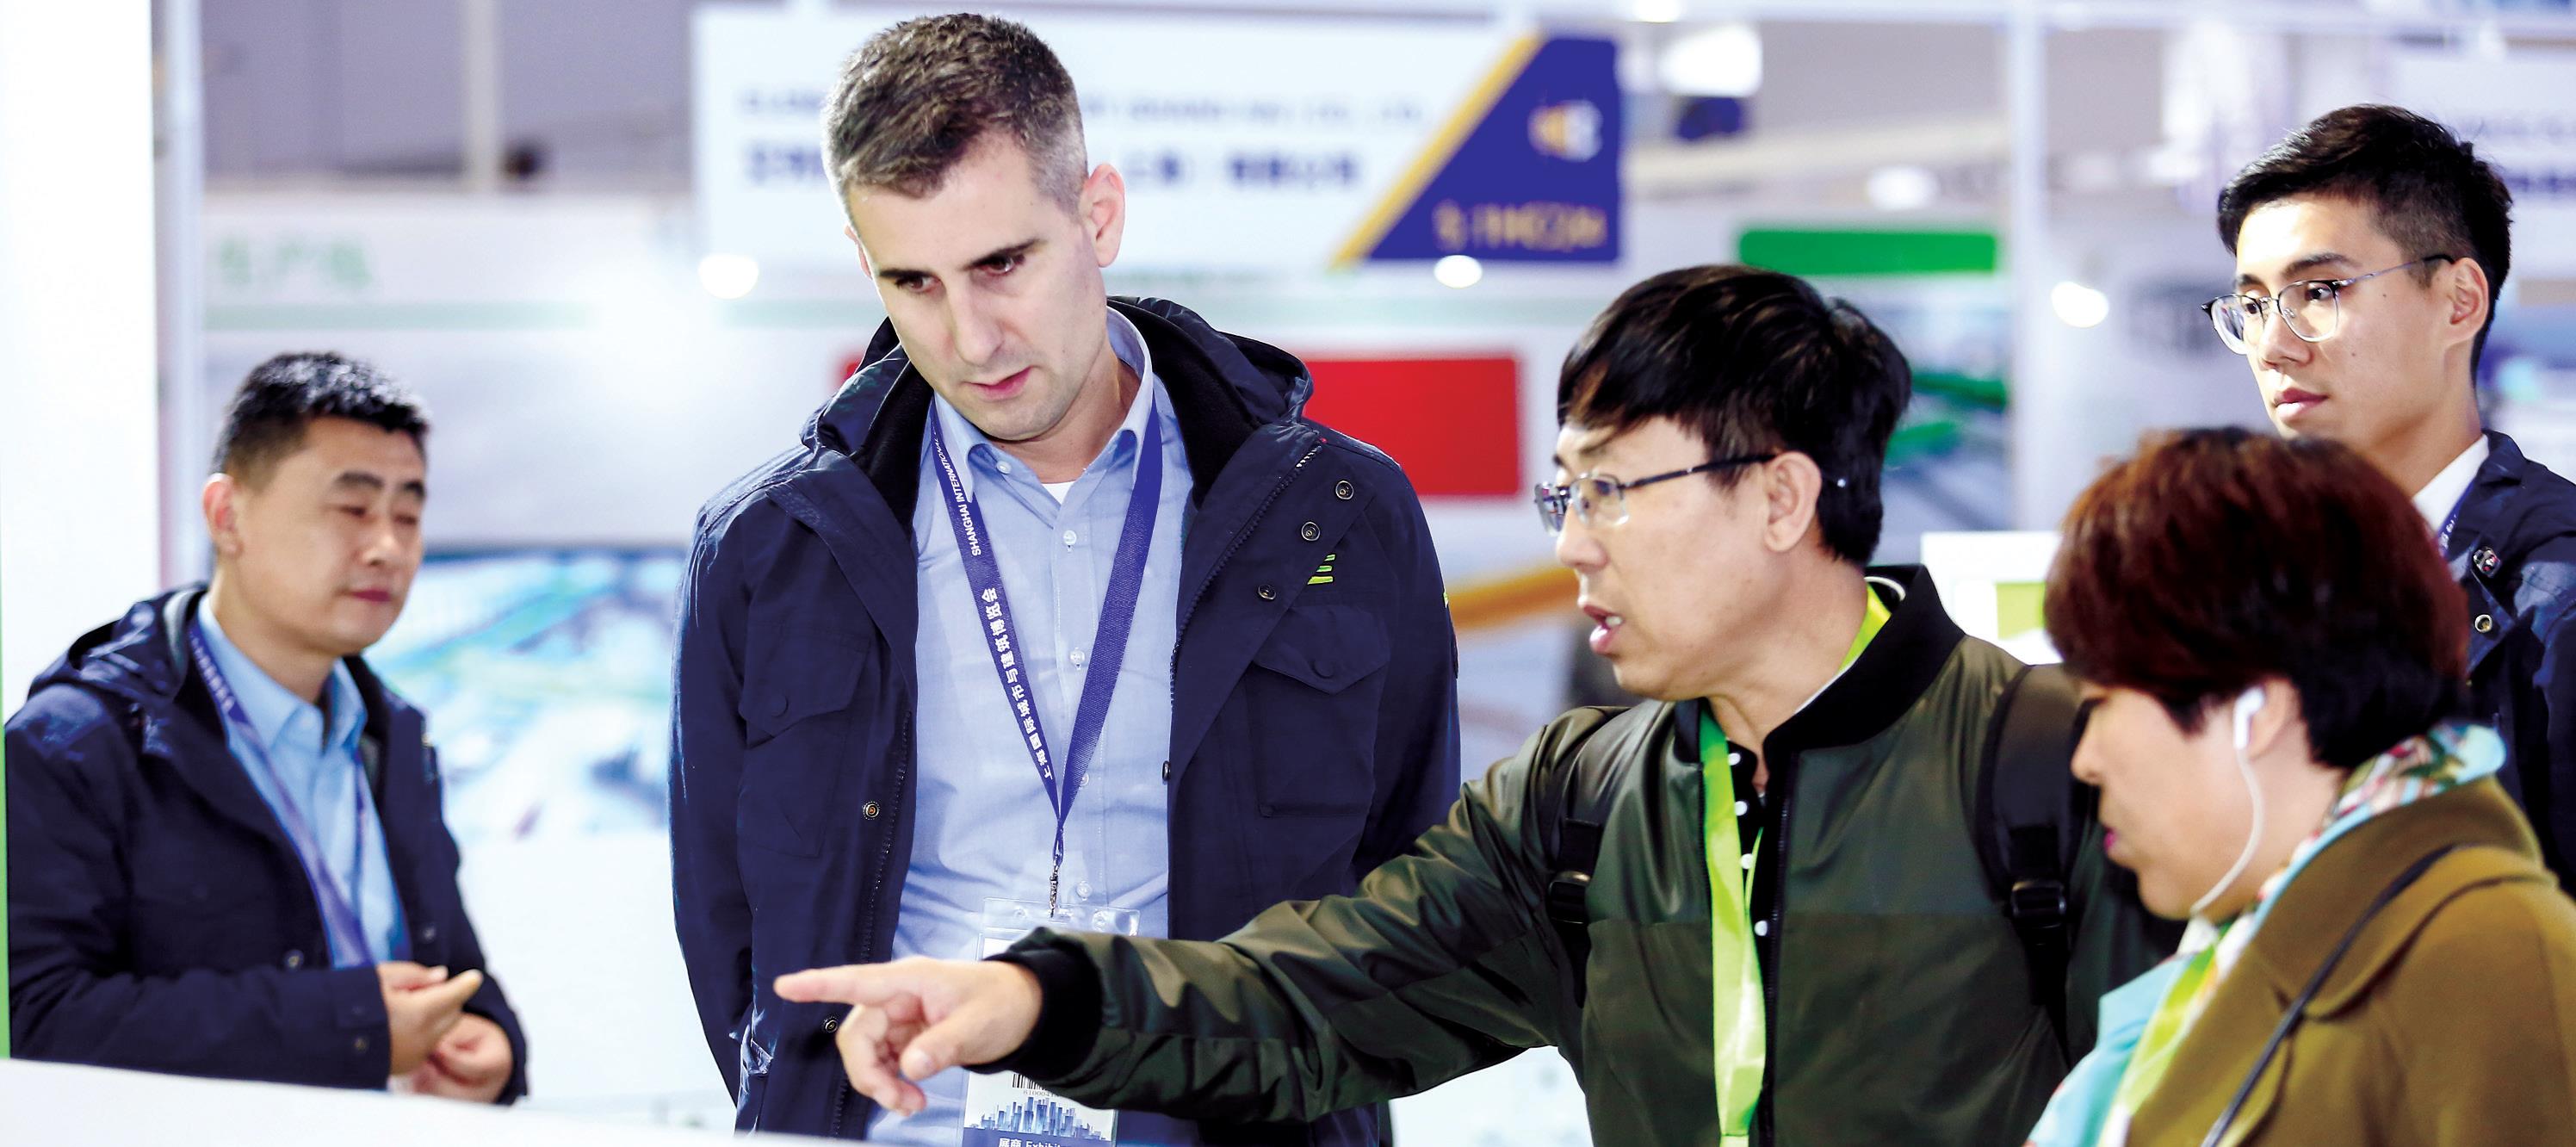 BIC 2019 Showcases Latest in Construction Technology and Trends